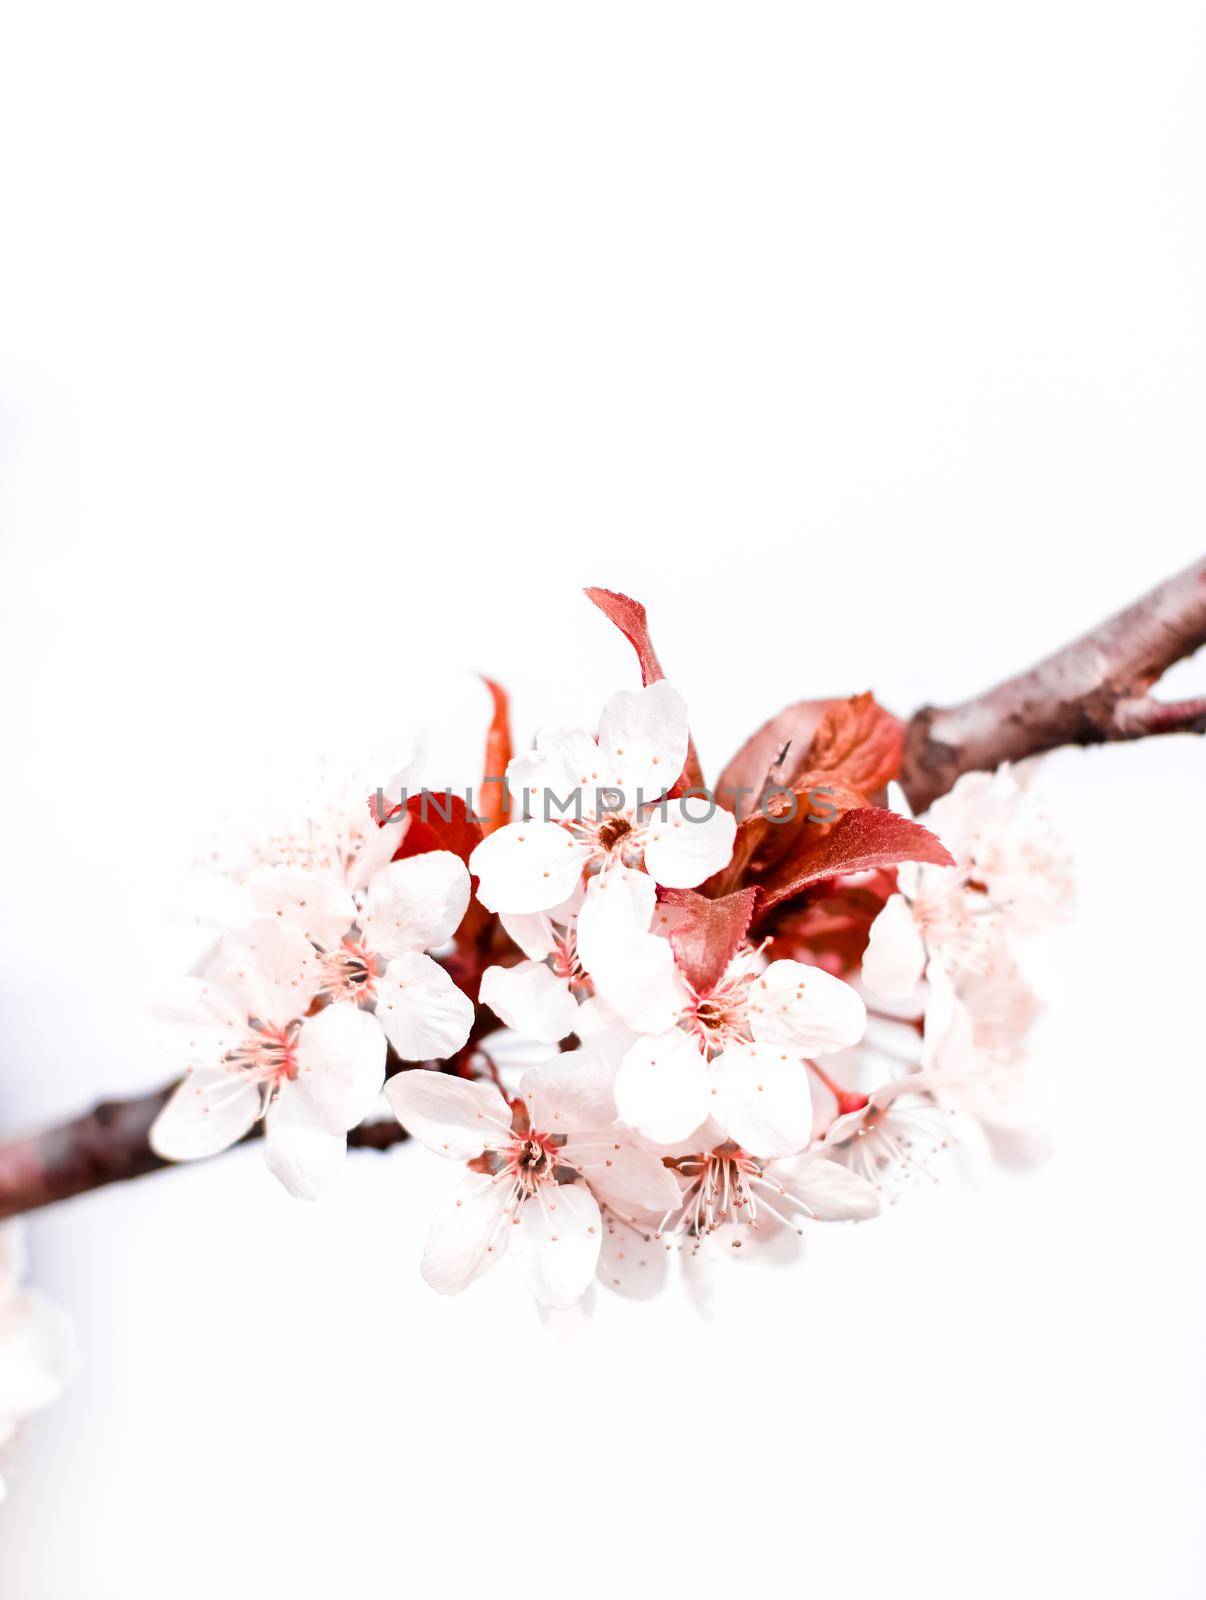 Botanical beauty, dream garden and natural scenery concept - Floral blossom in spring, pink flowers as nature background